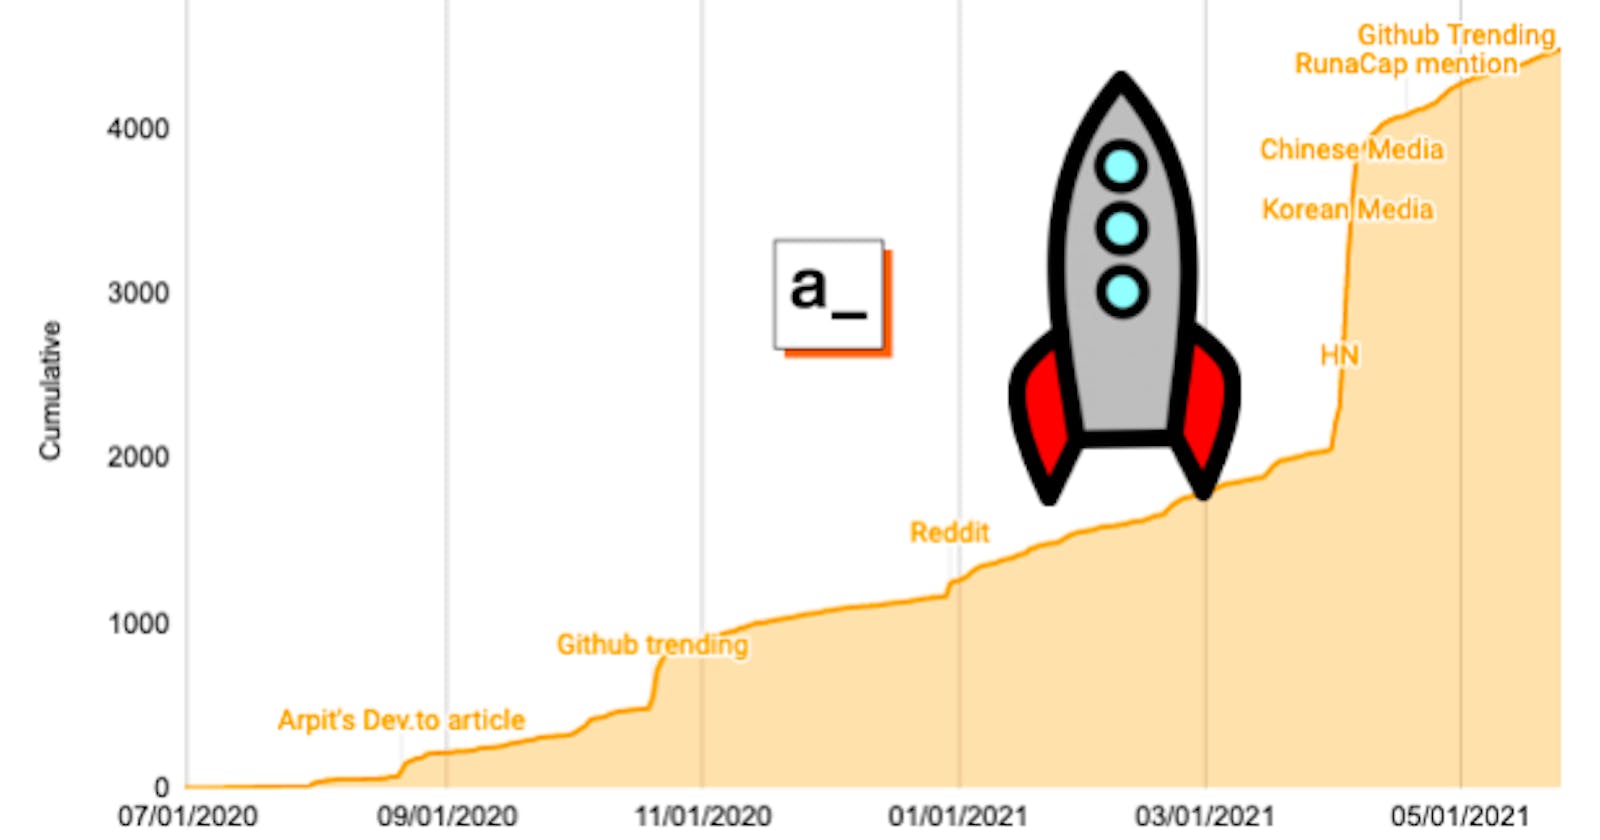 In 9 months, 4500 people starred Appsmith on Github. What do we know about them?